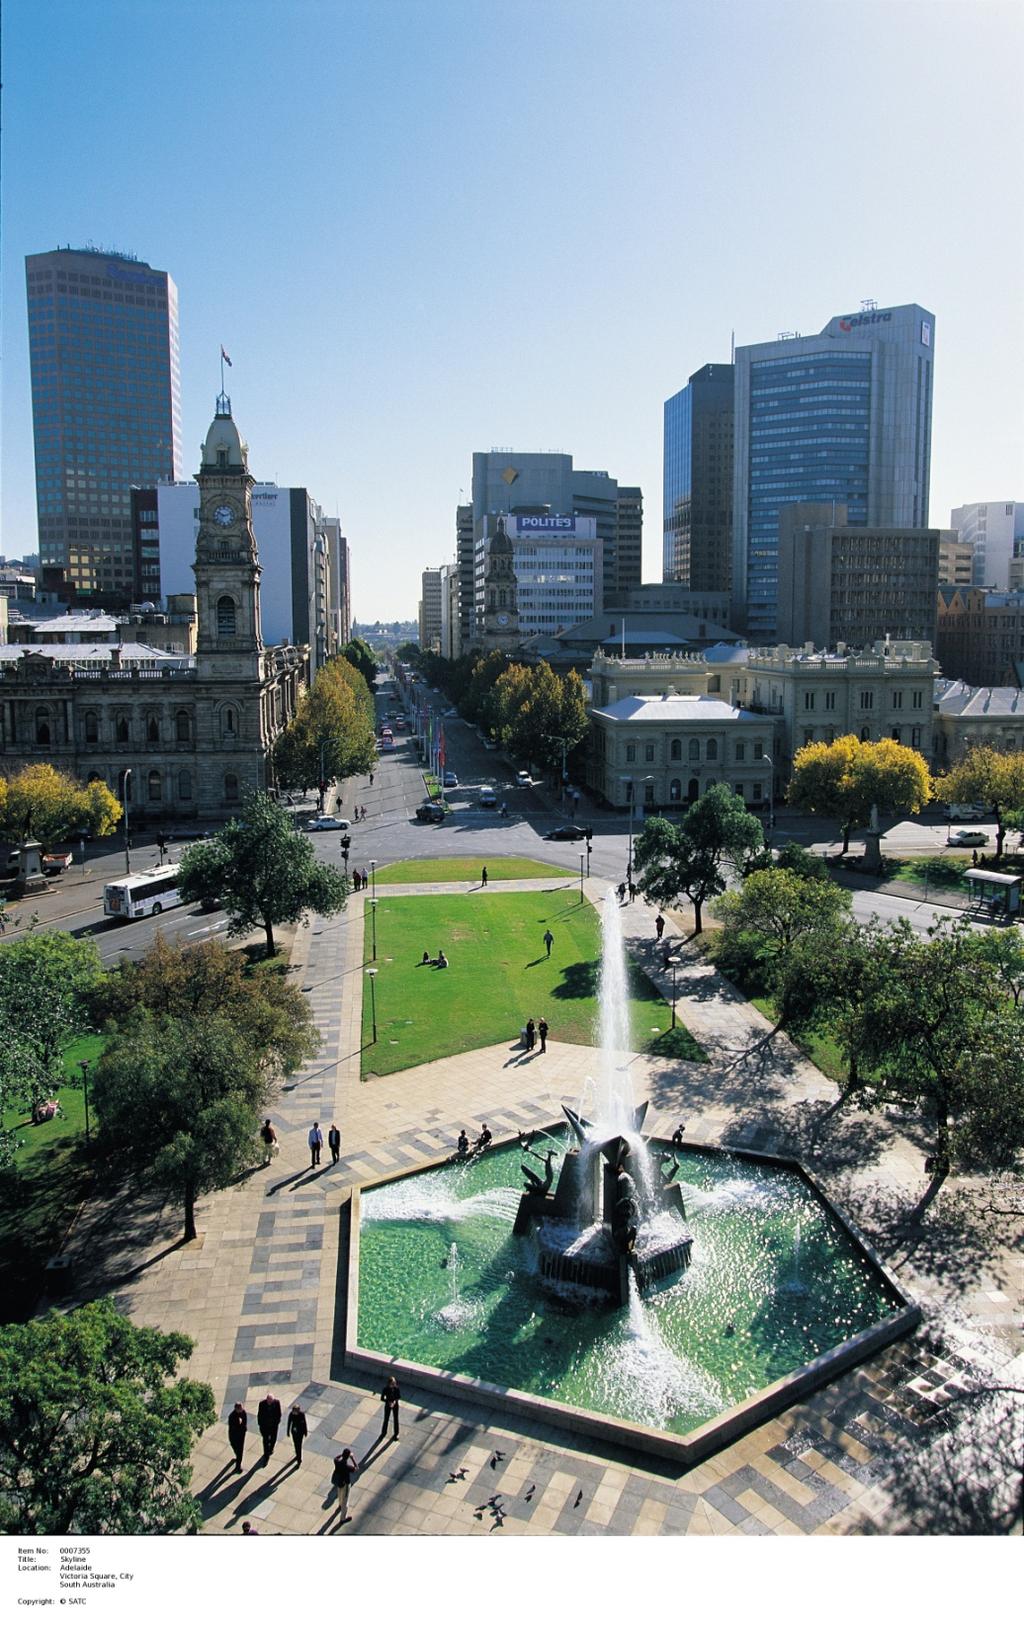 Overview About Adelaide Things to do Places